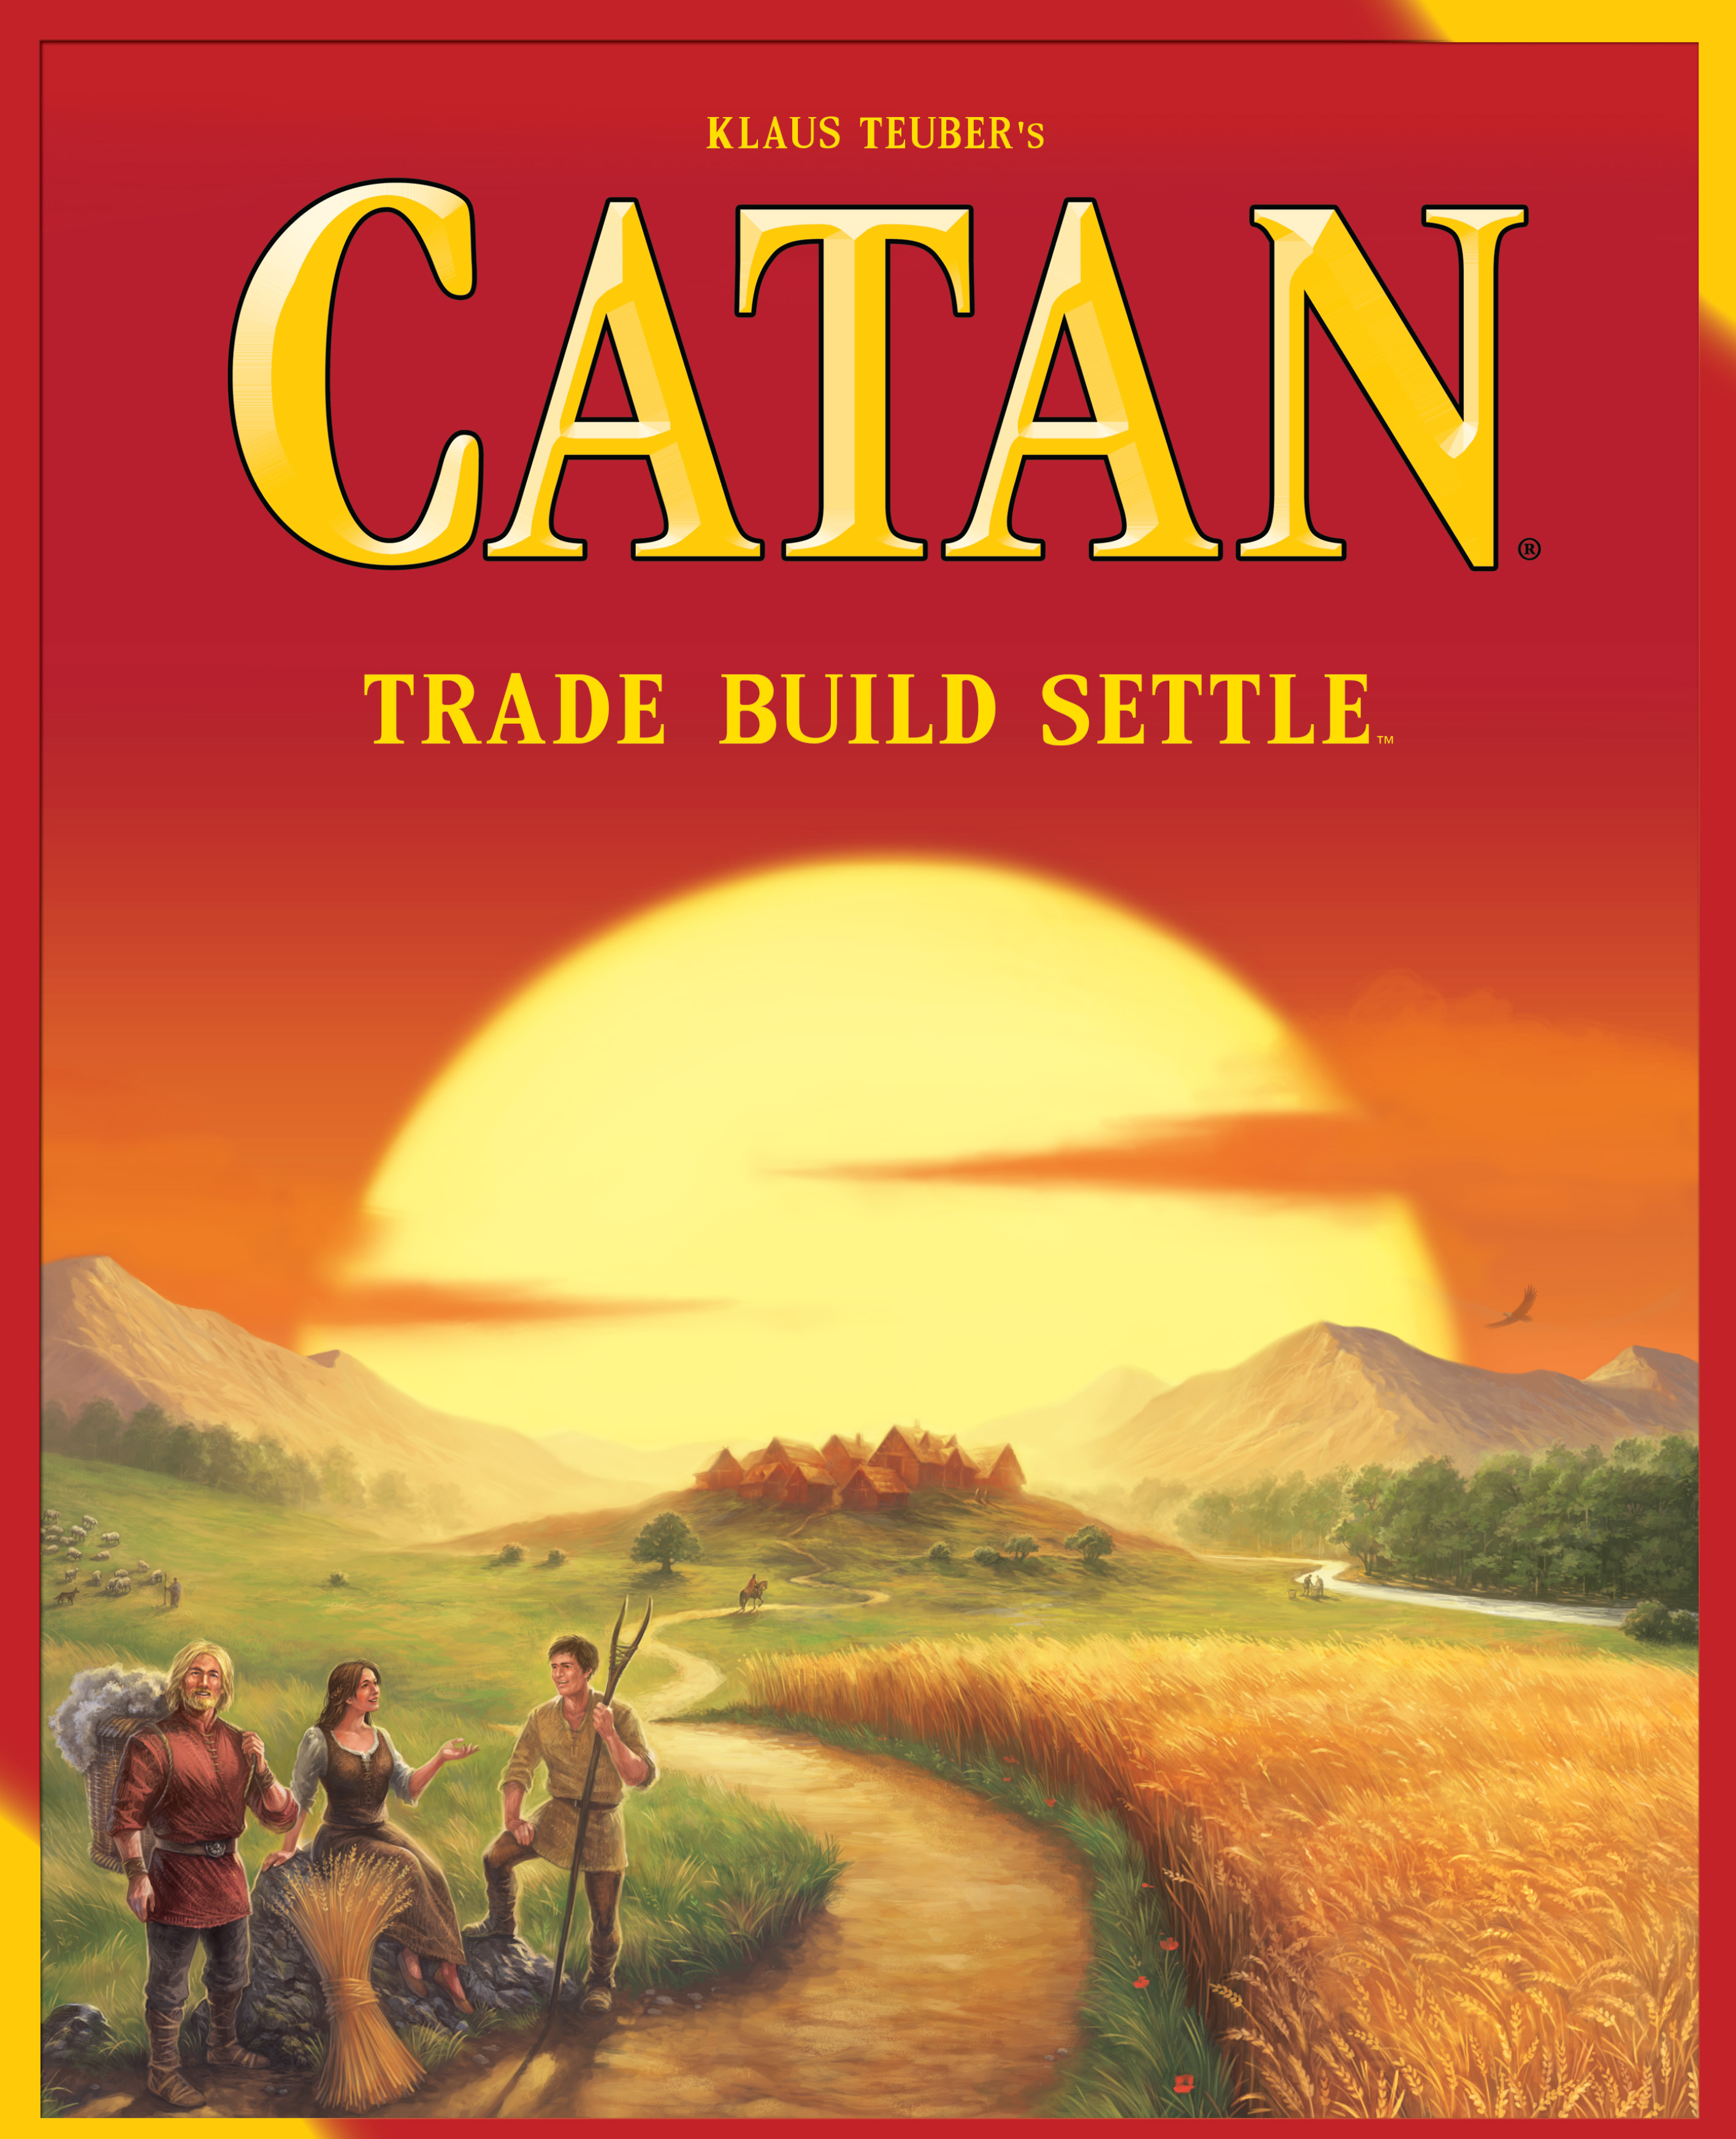 Settlers of Catan, a tabletop game